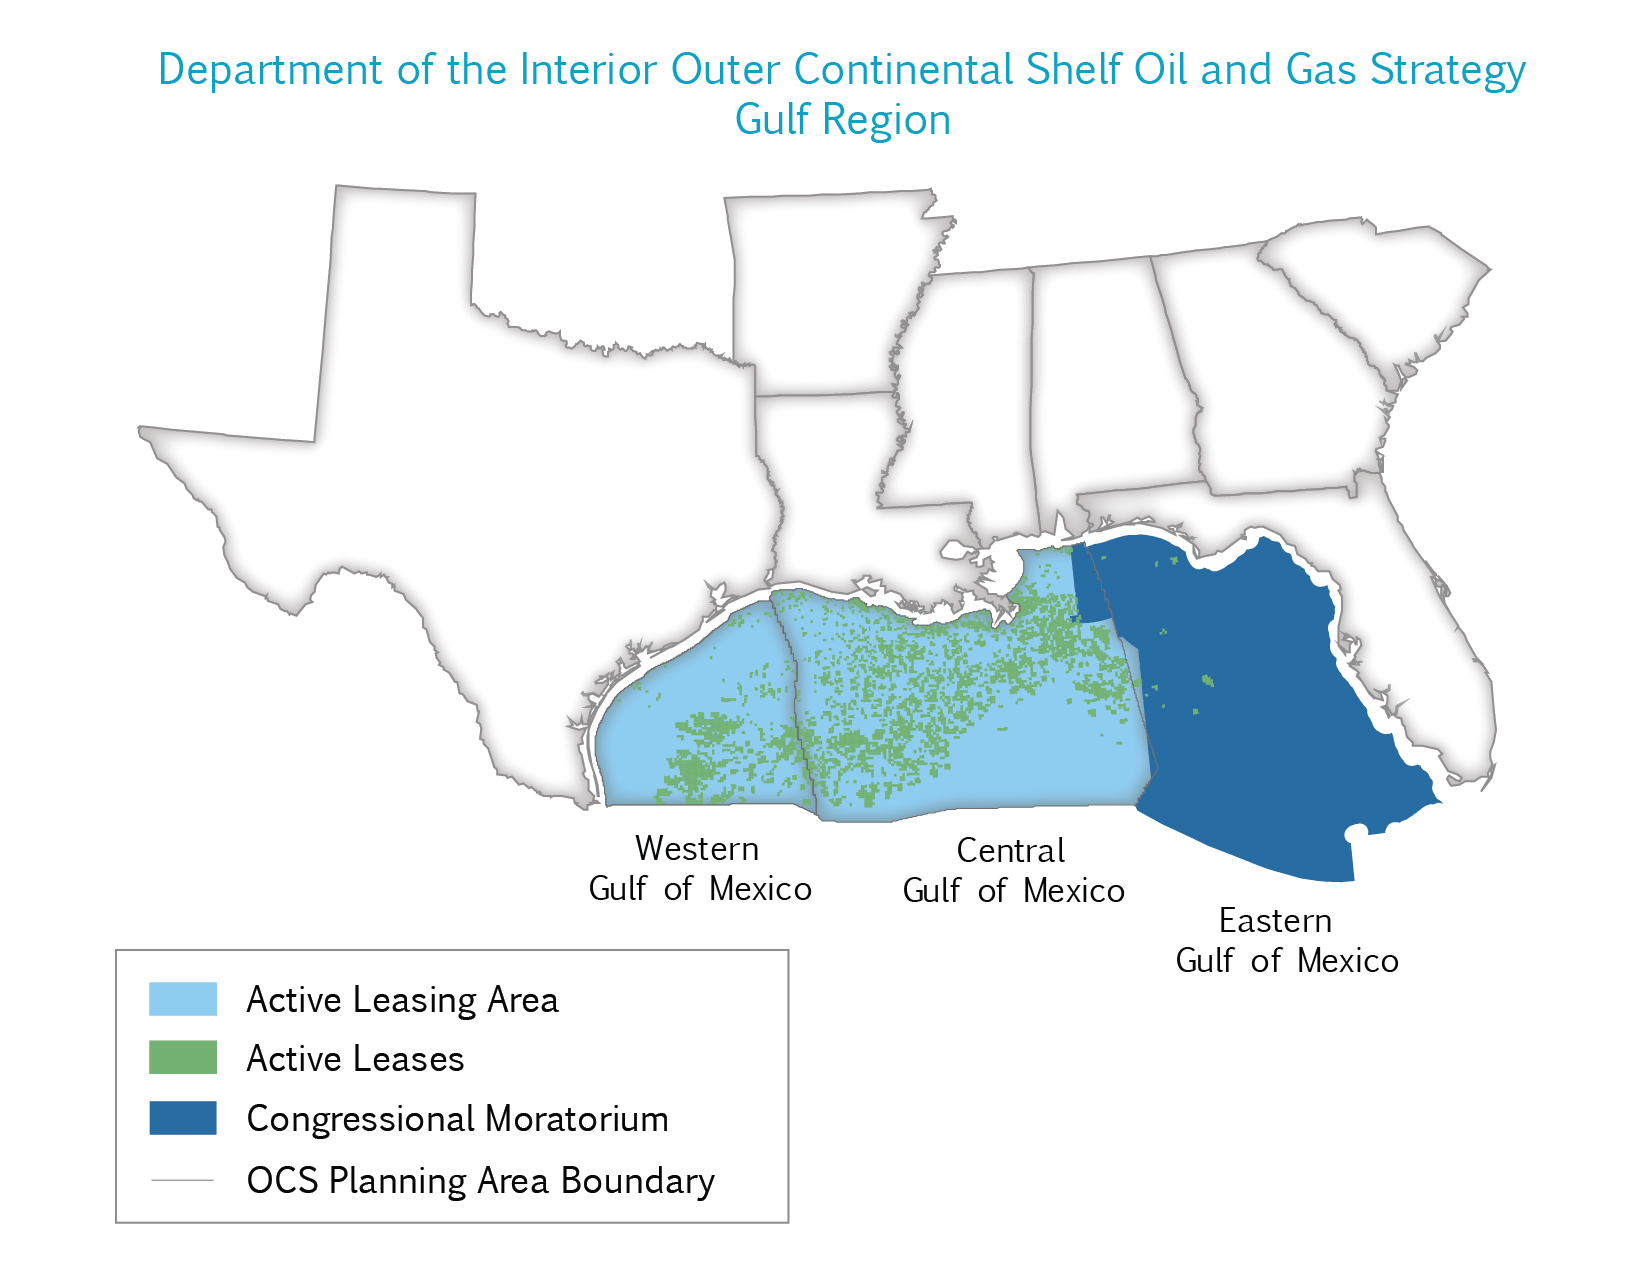 BSEE Gulf of Mexico Region with offshore gas and oil lease information.